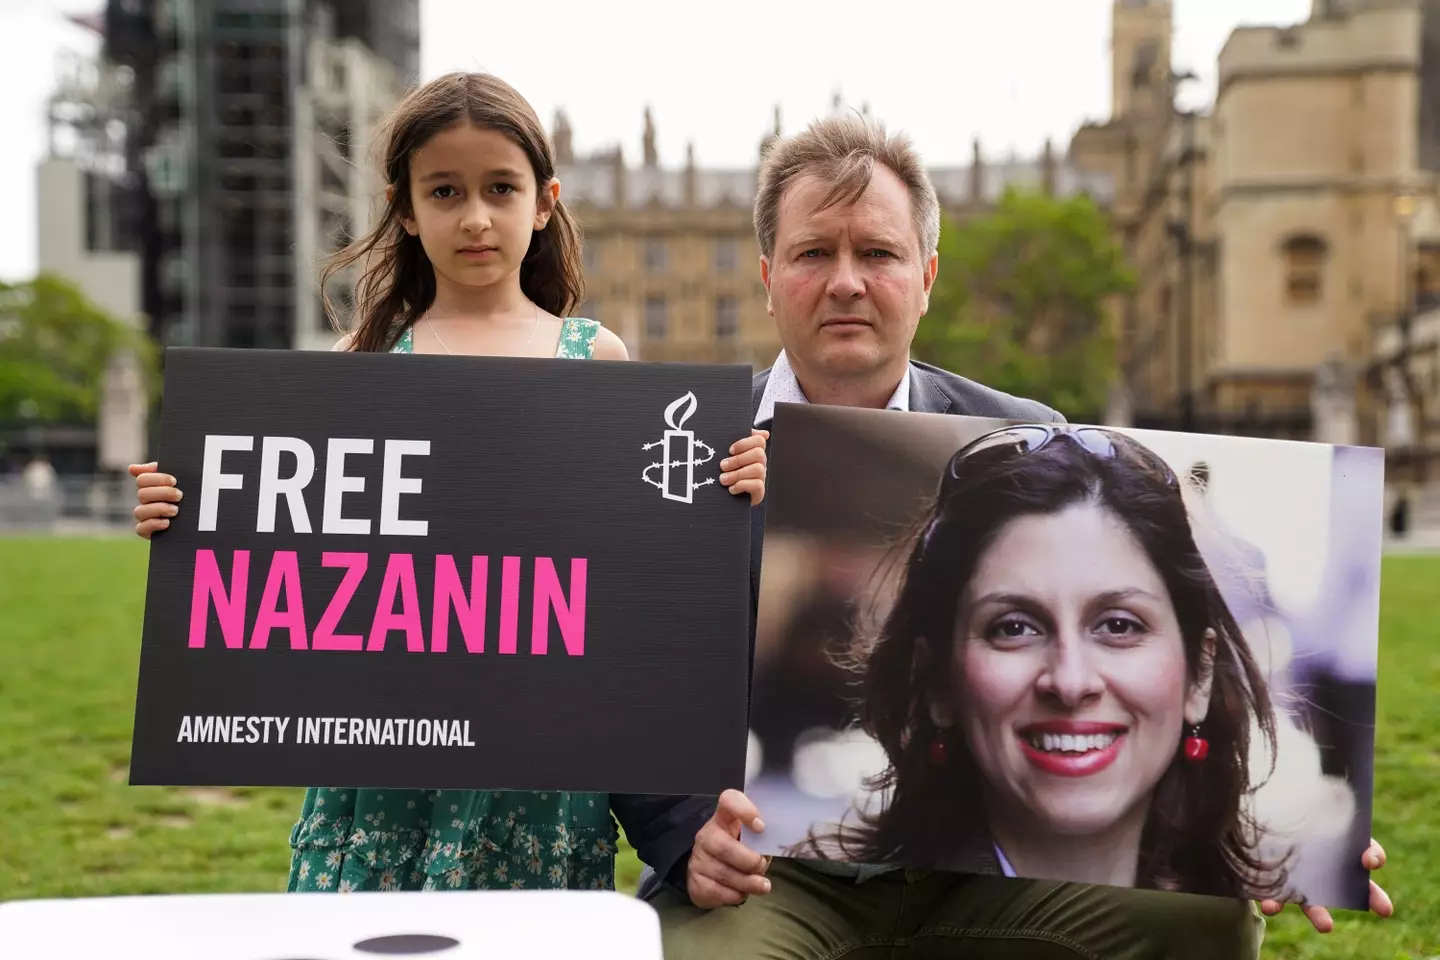 Nazanin Zaghari-Ratcliffe's daughter and husband protesting for her release.